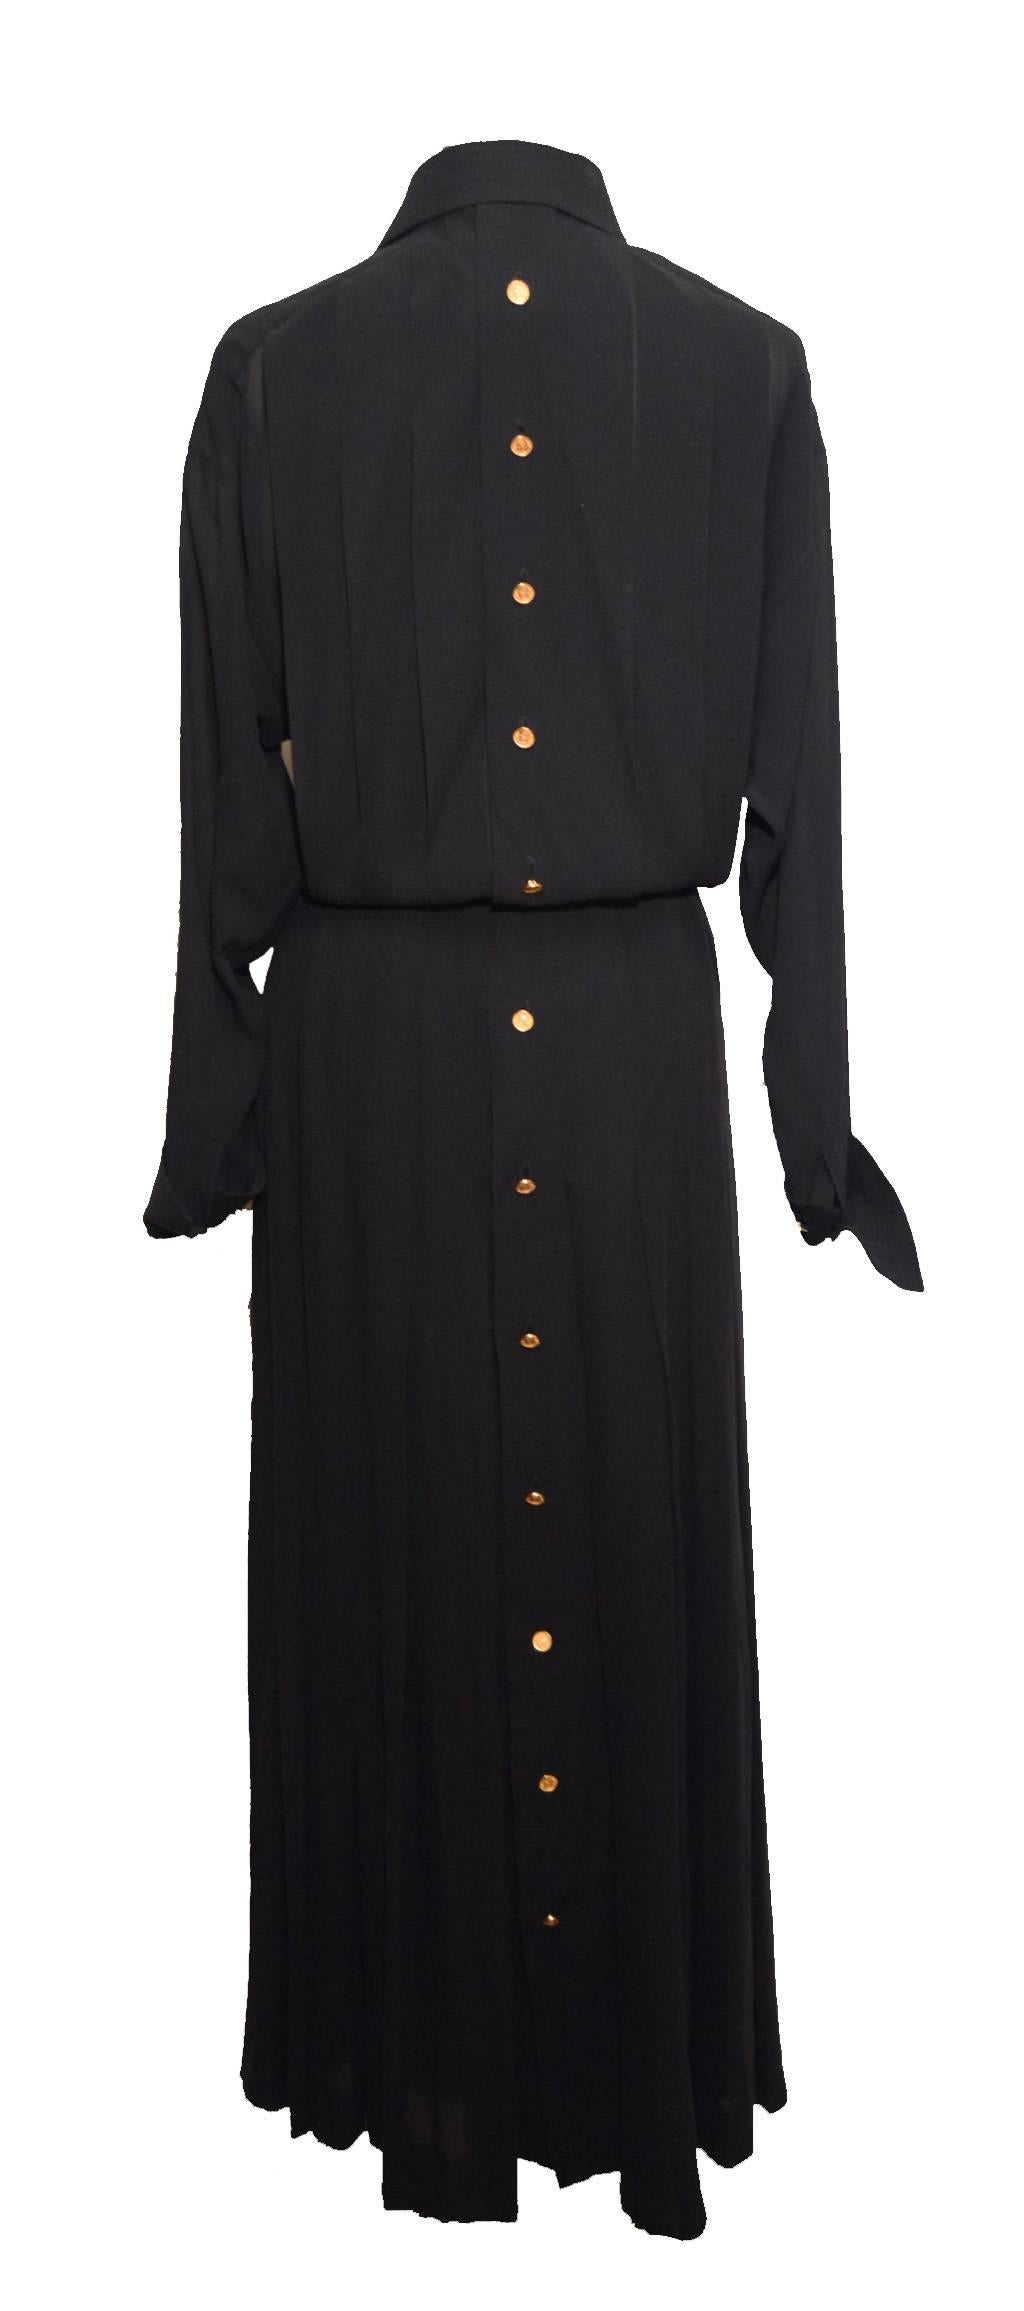 Black medium weight silk dress.  This classic career girl dress has a box pleated blouson top and box pleats extending below the hip to the hem of the skirt.  Pointed collar.  Both collar and cuffs have rows of straight stitching as